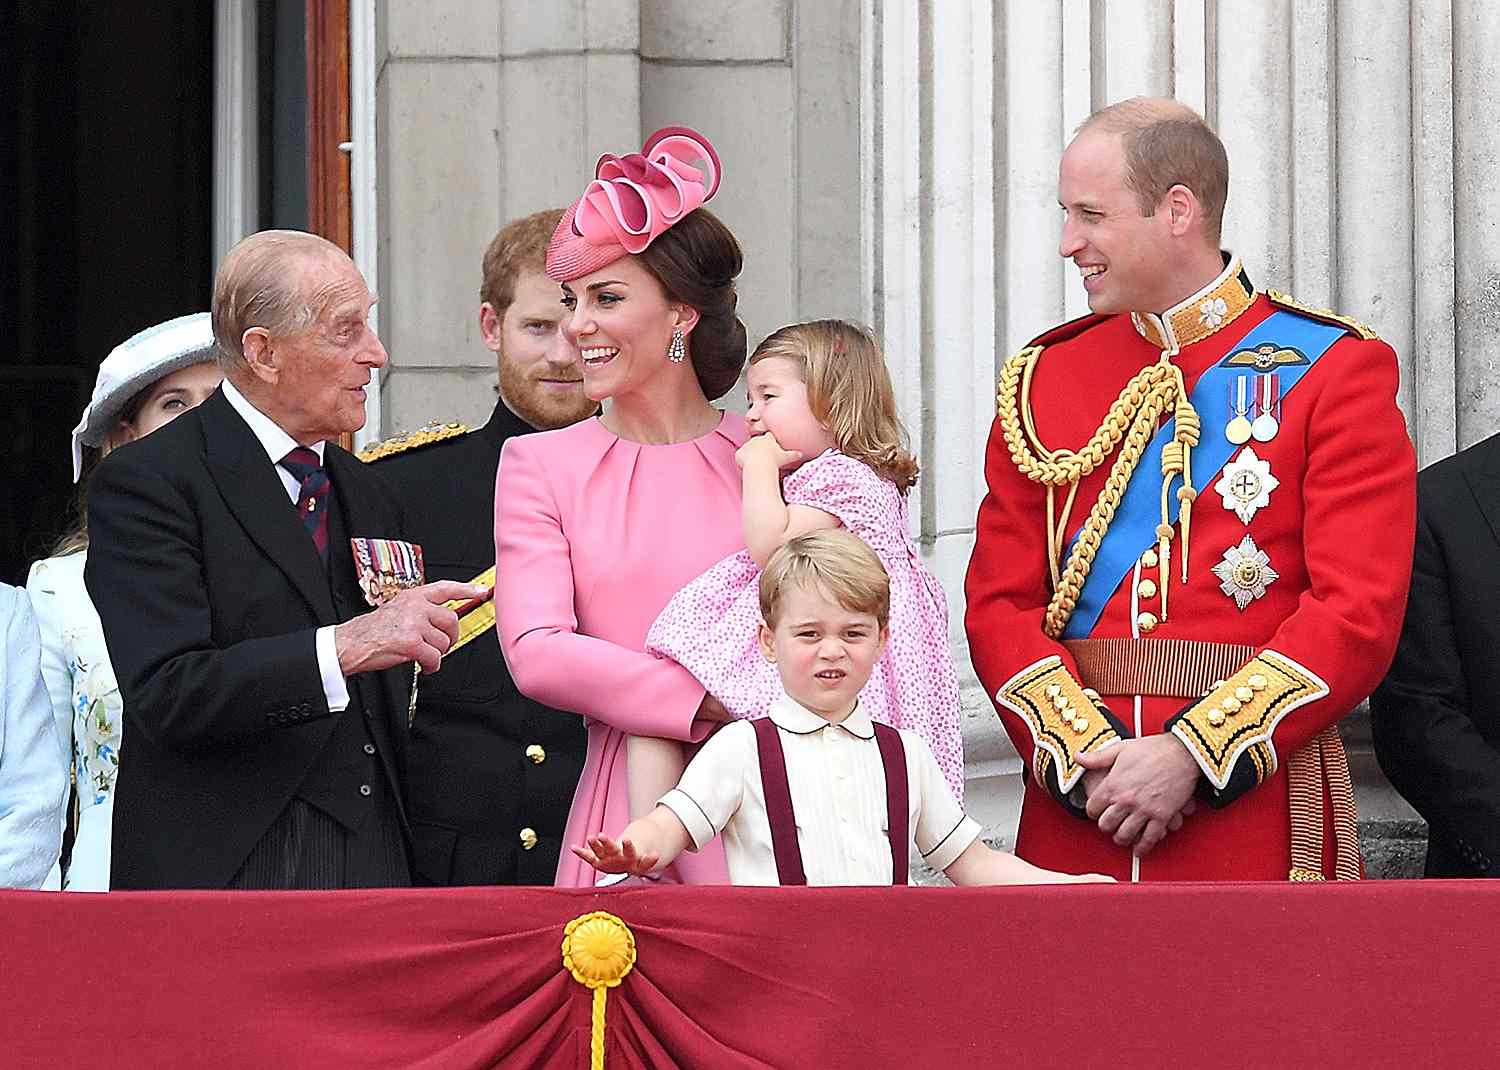 Prince Philip, Will, Kate